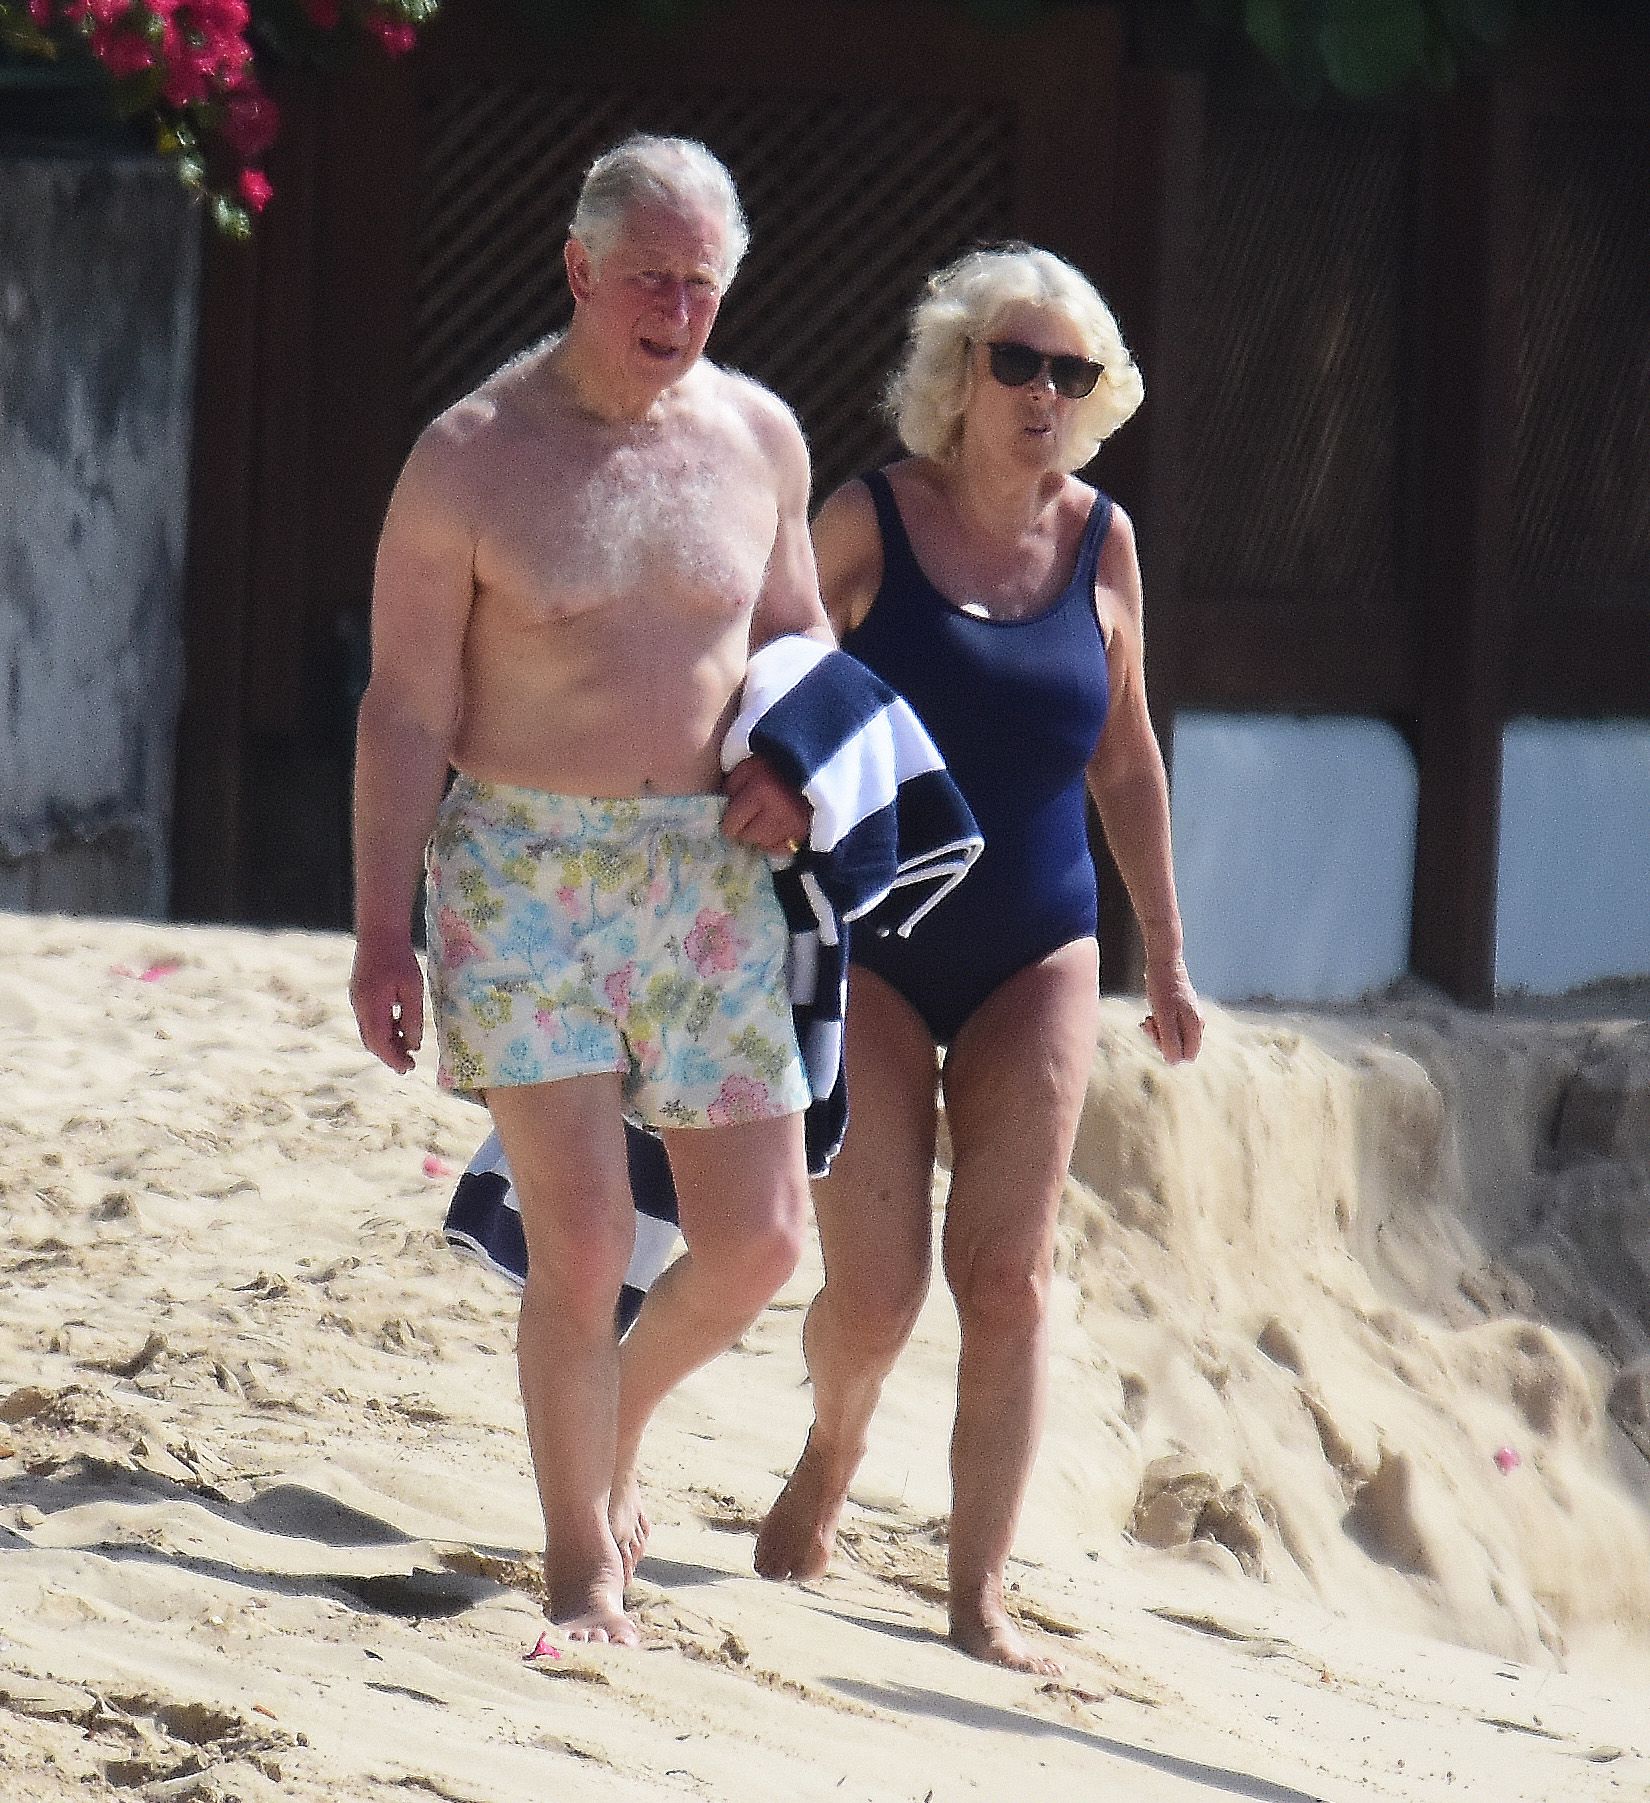 Jamaican Topless Beach - Prince Charles Is Shirtless, Has a Cracking Bod Photos